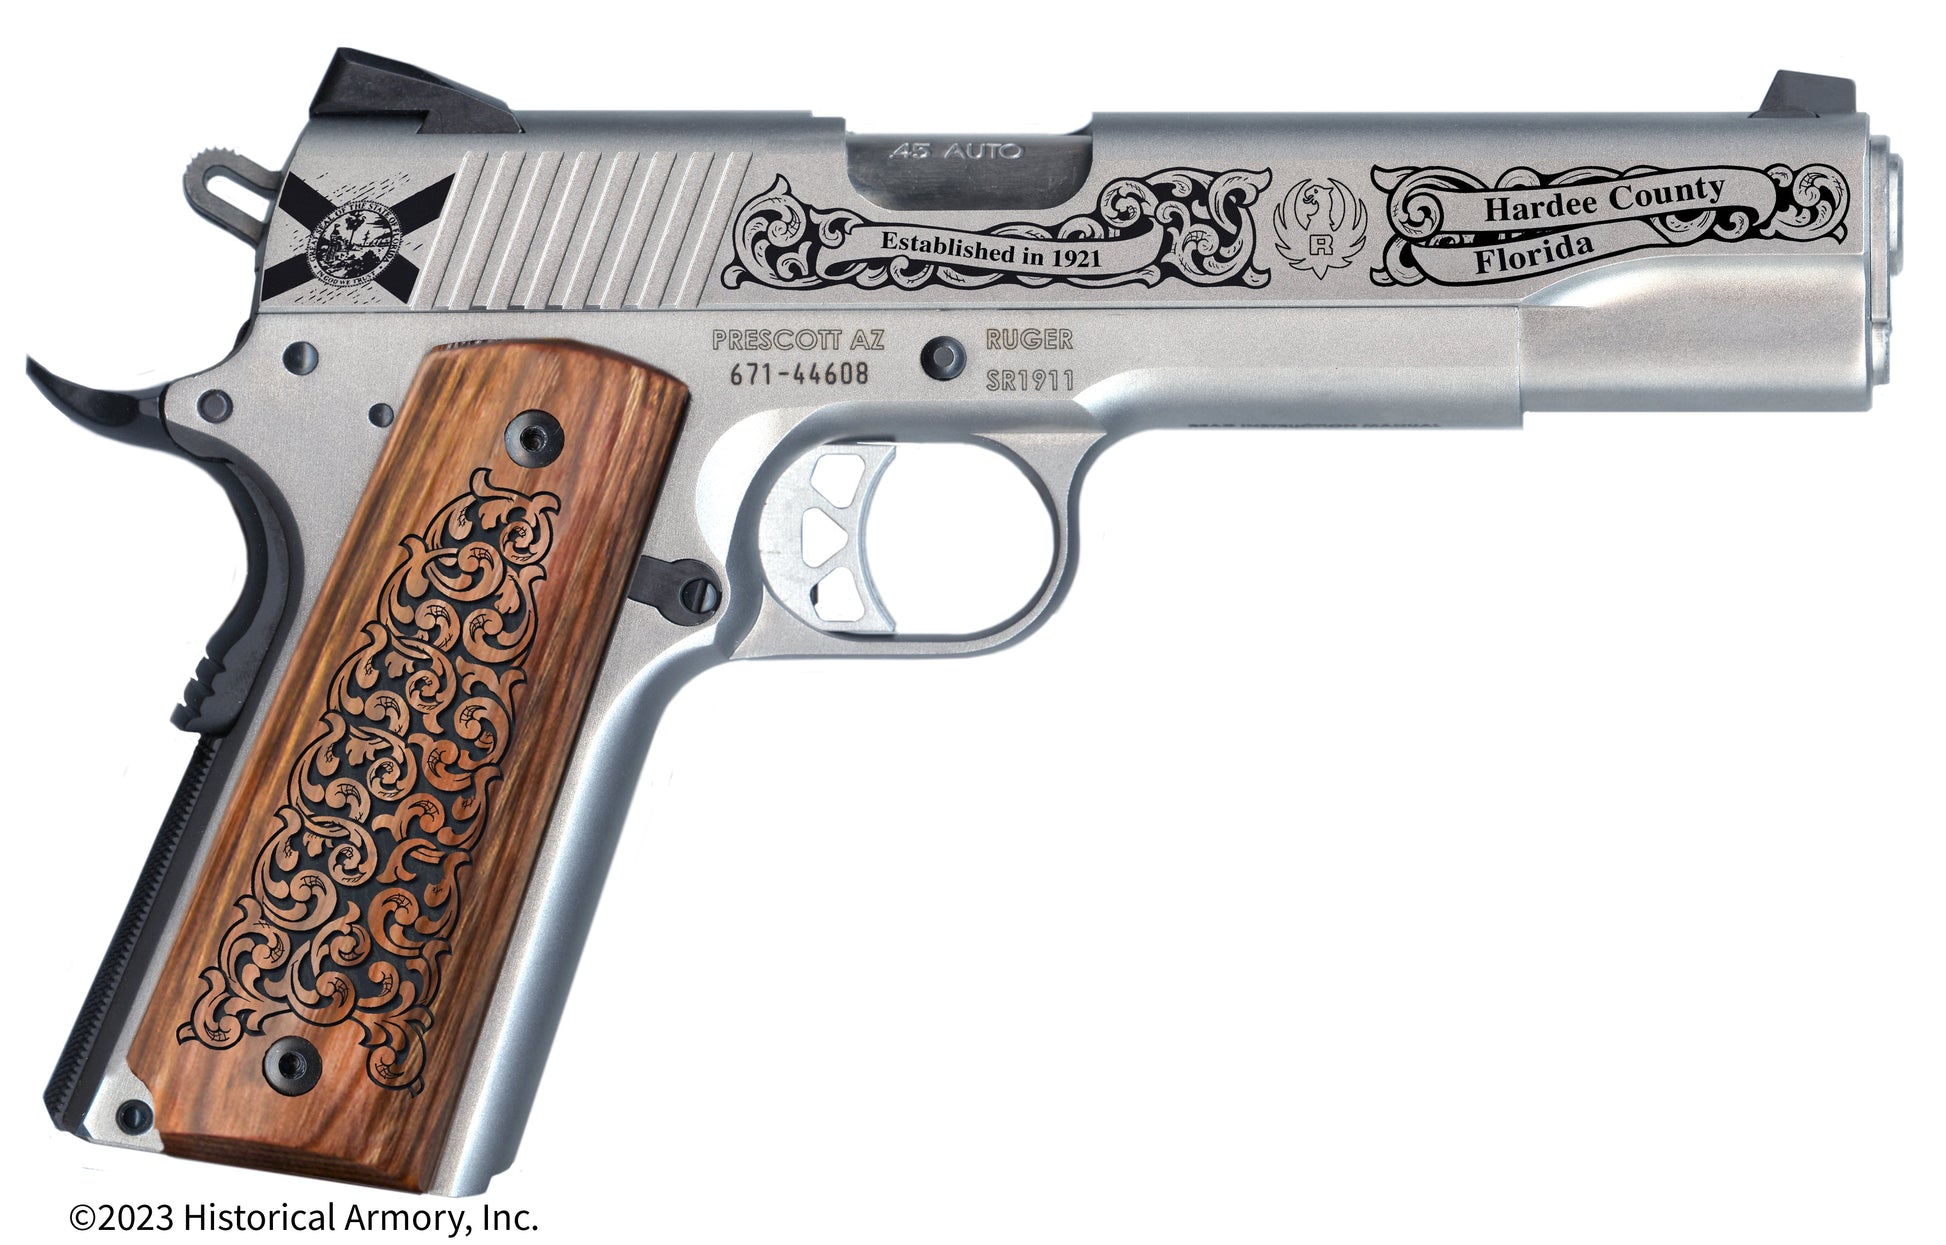 Hardee County Florida Engraved .45 Auto Ruger 1911